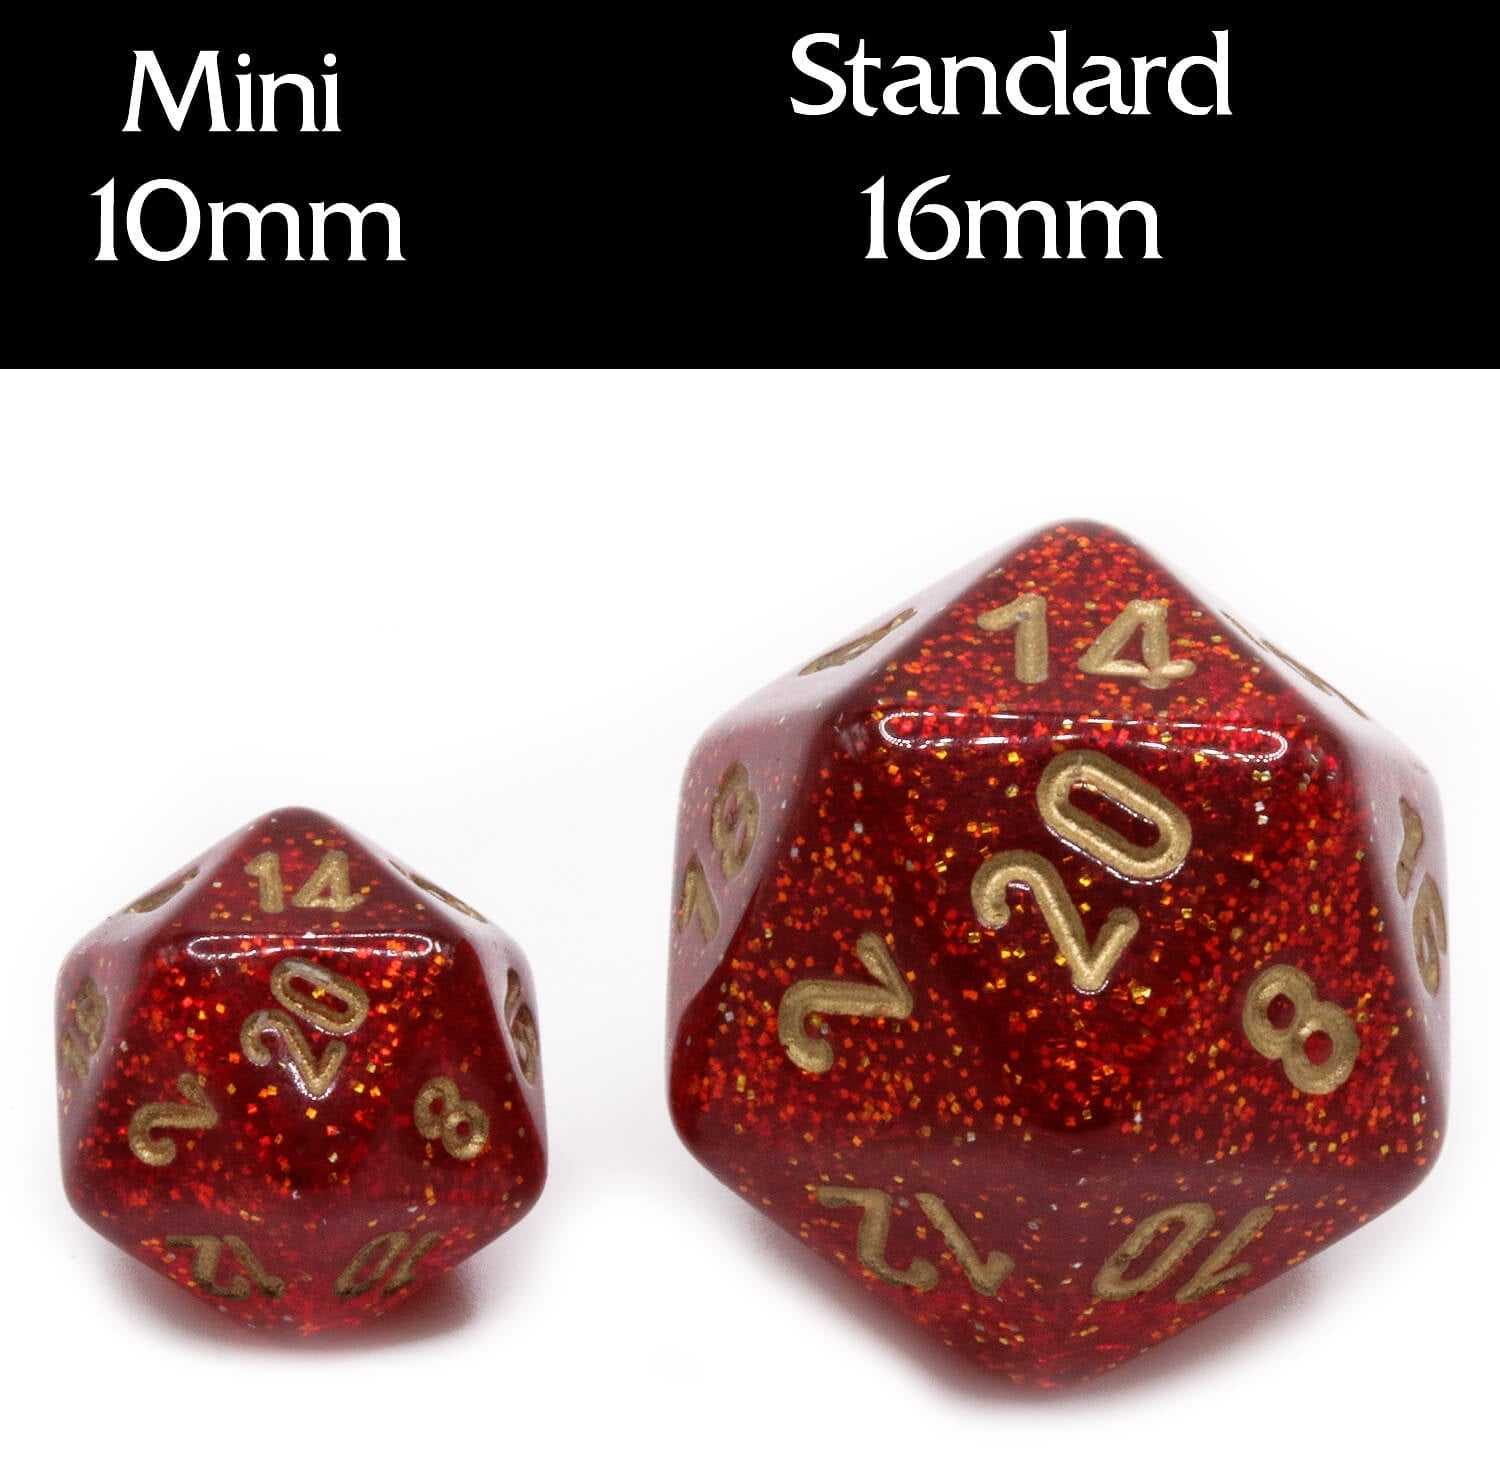 Chessex Mini Dice Series 2 (Lustrous Gold With Silver) | 10mm TTRPG Dice Set CHX20493